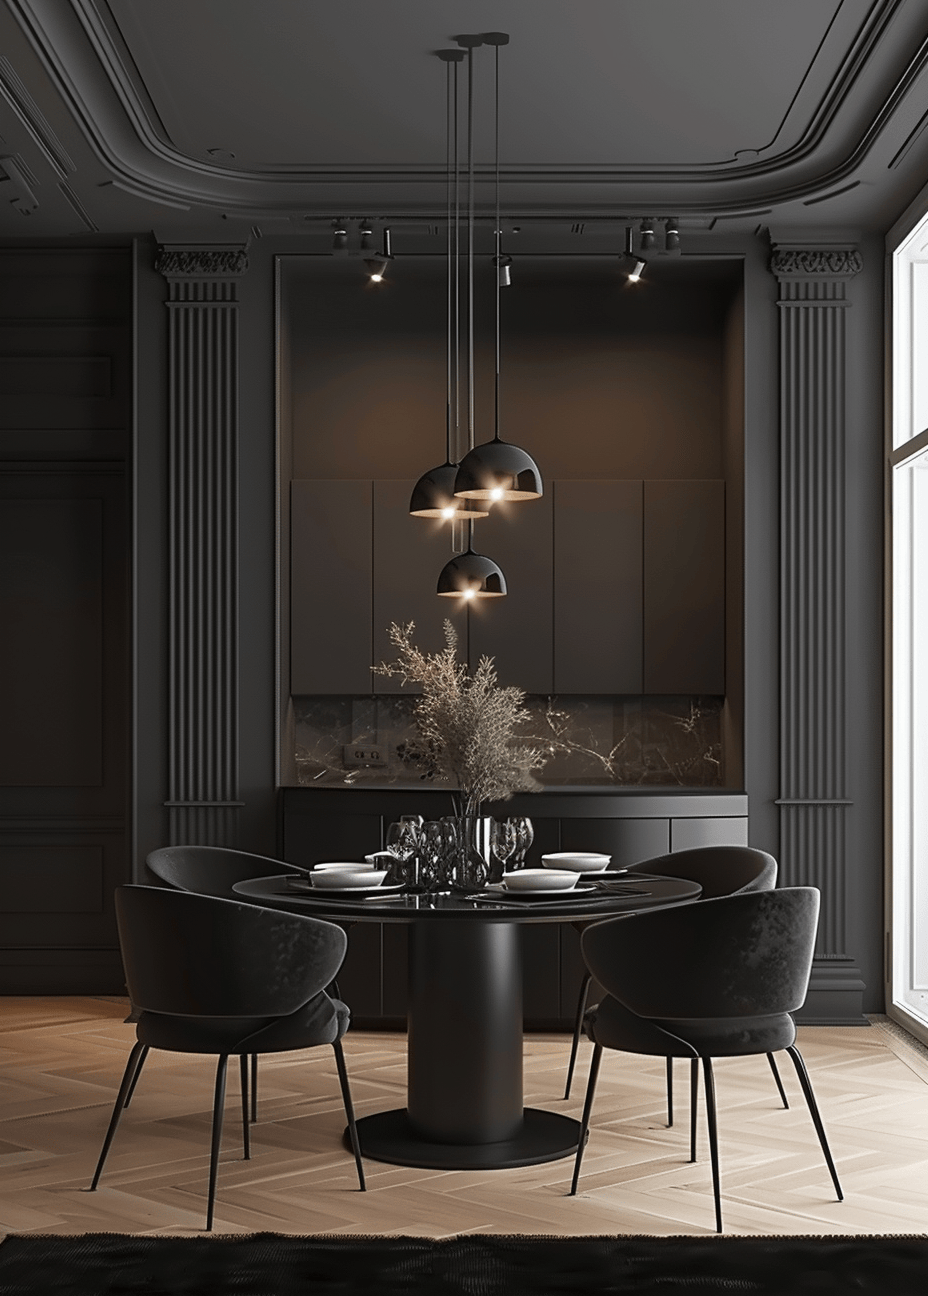 Dark dining room aesthetic decor with decorative trays and layered lighting scheme